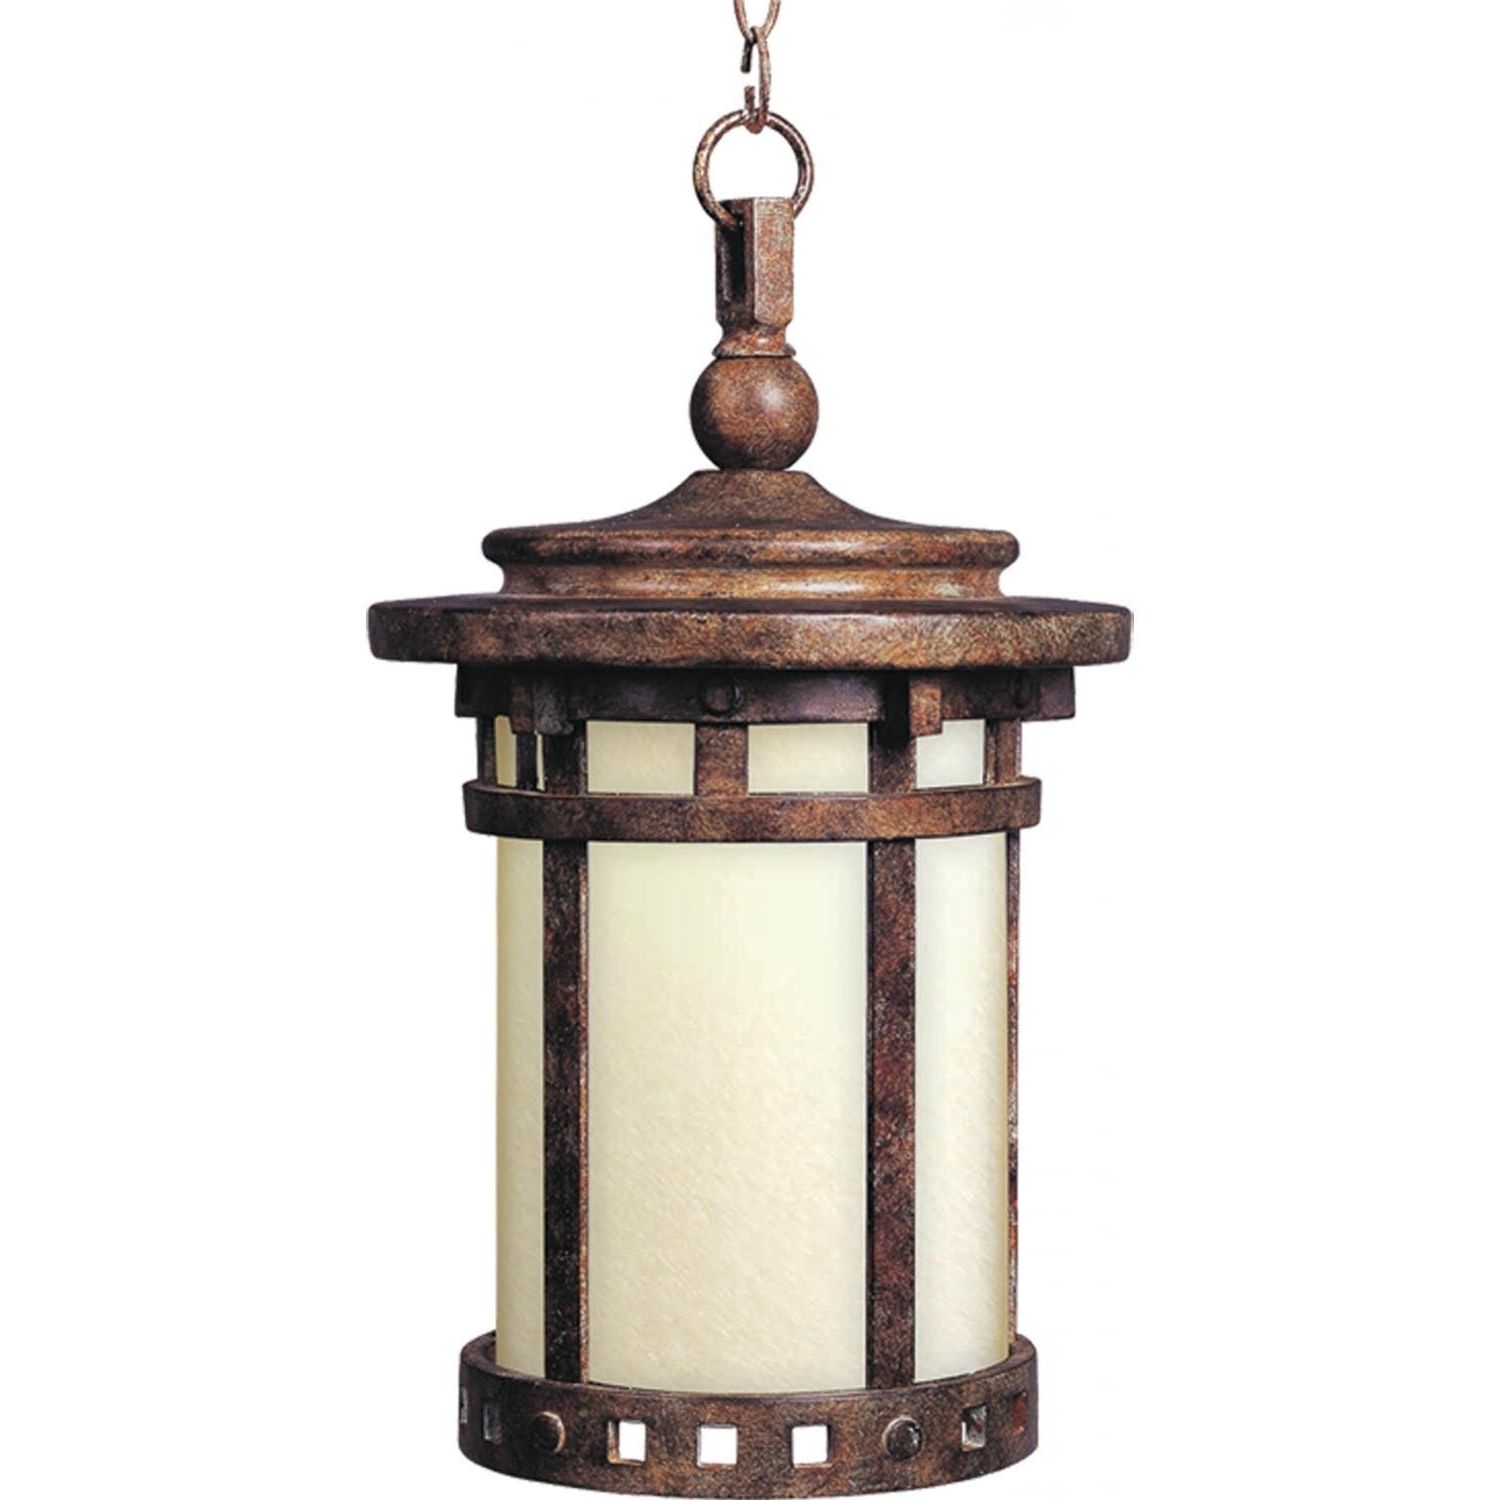 Fashionable Outdoor Pendants Ceiling Lighting Pictures With Awesome Outdoor Throughout Outdoor Hanging Lanterns From Canada (View 20 of 20)